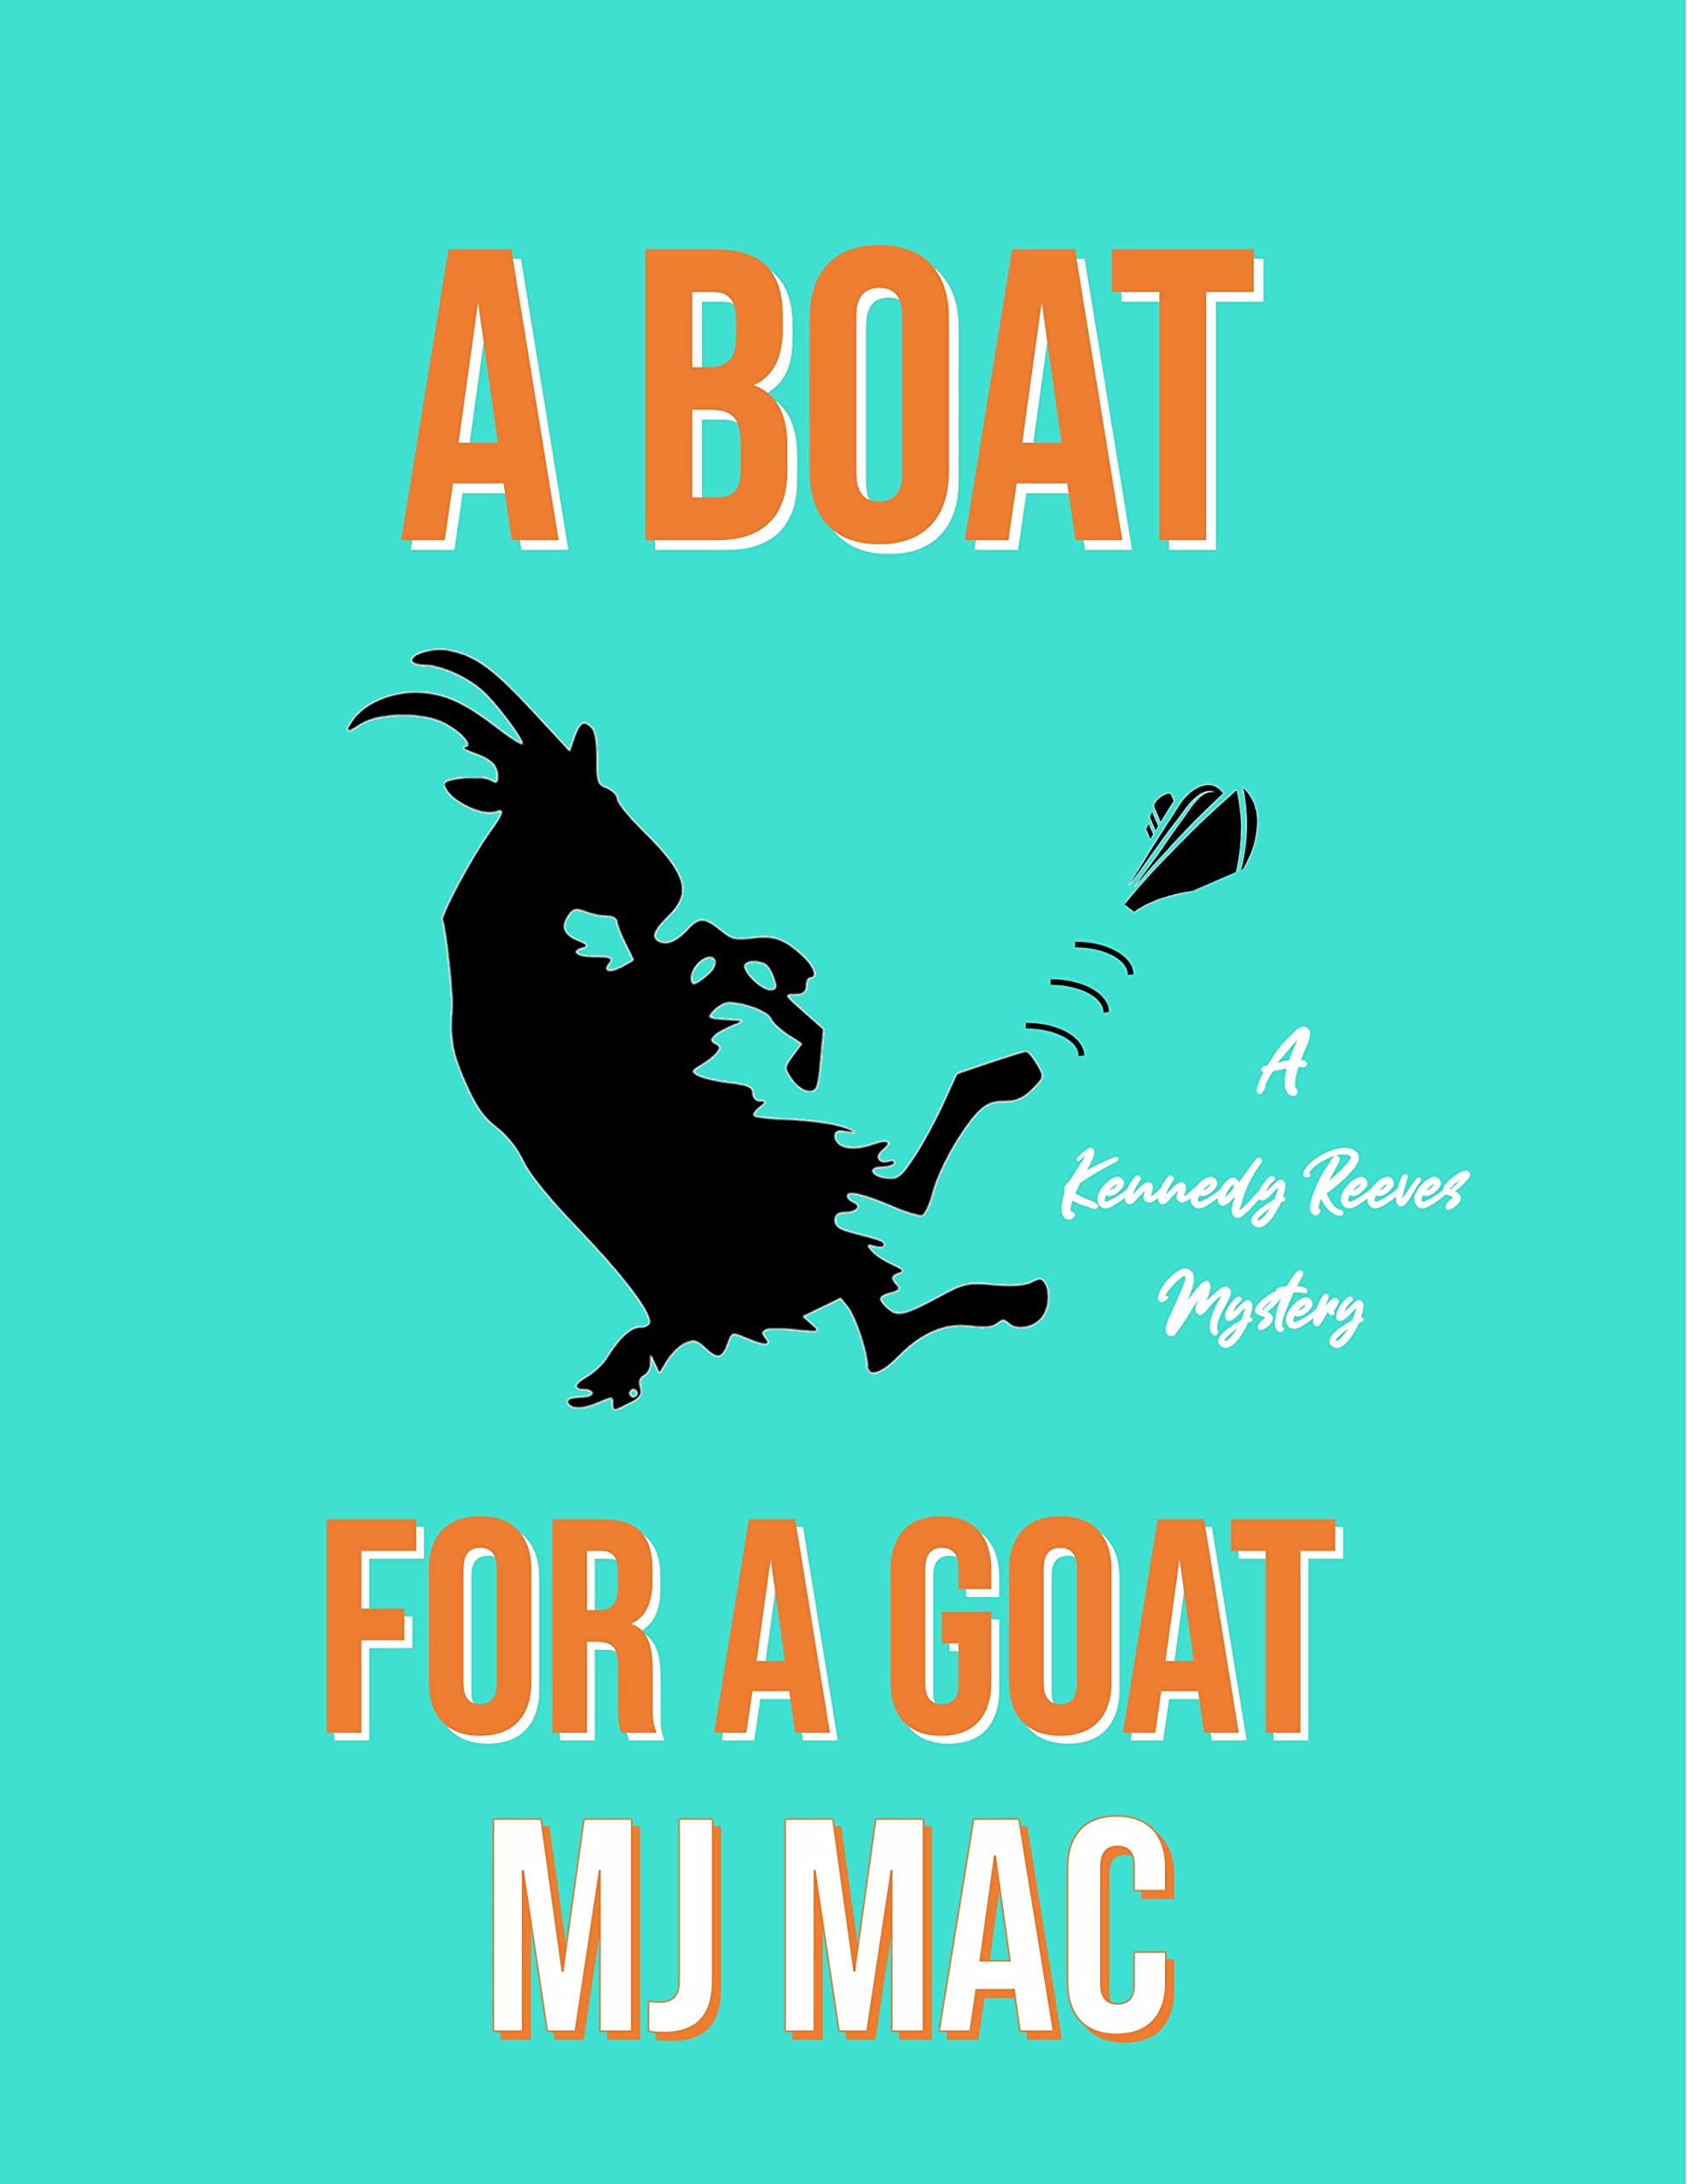 A Boat for a Goat: A Kennedy Reeves Cozy Cocktail Cruise Mystery